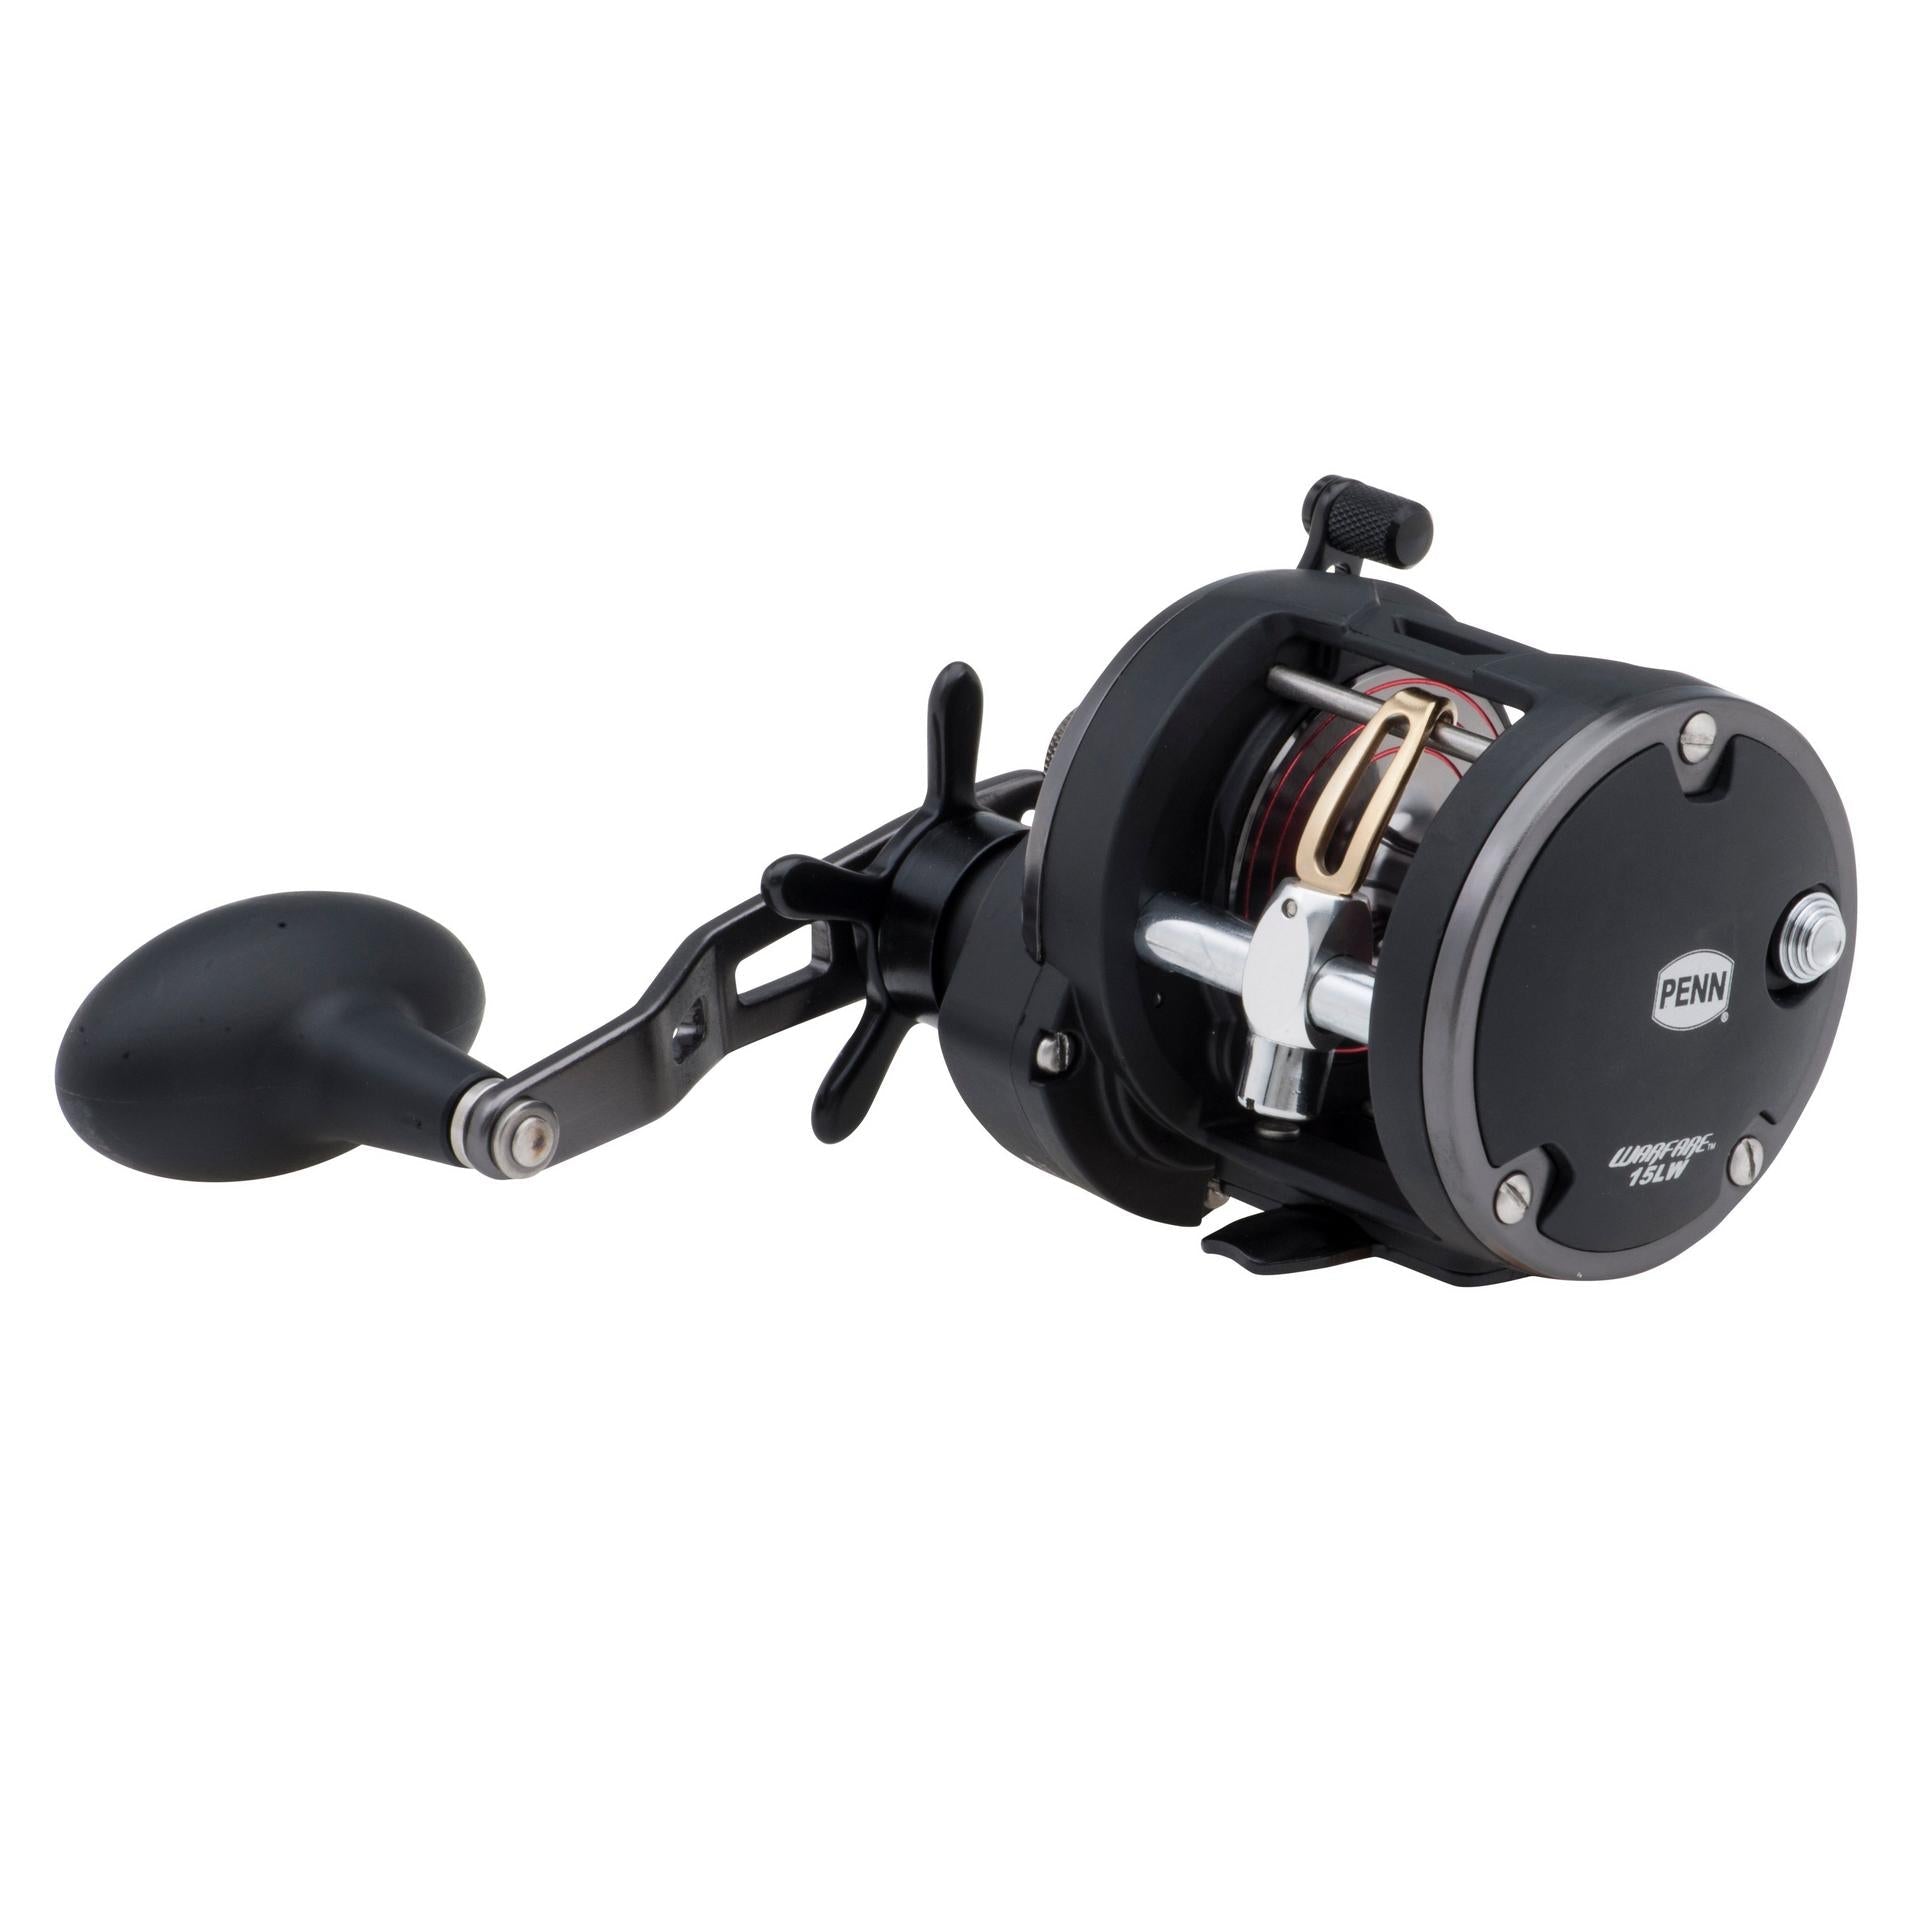 PENN Squall II Star Drag Conventional Reel, Size 30, Right-Hand